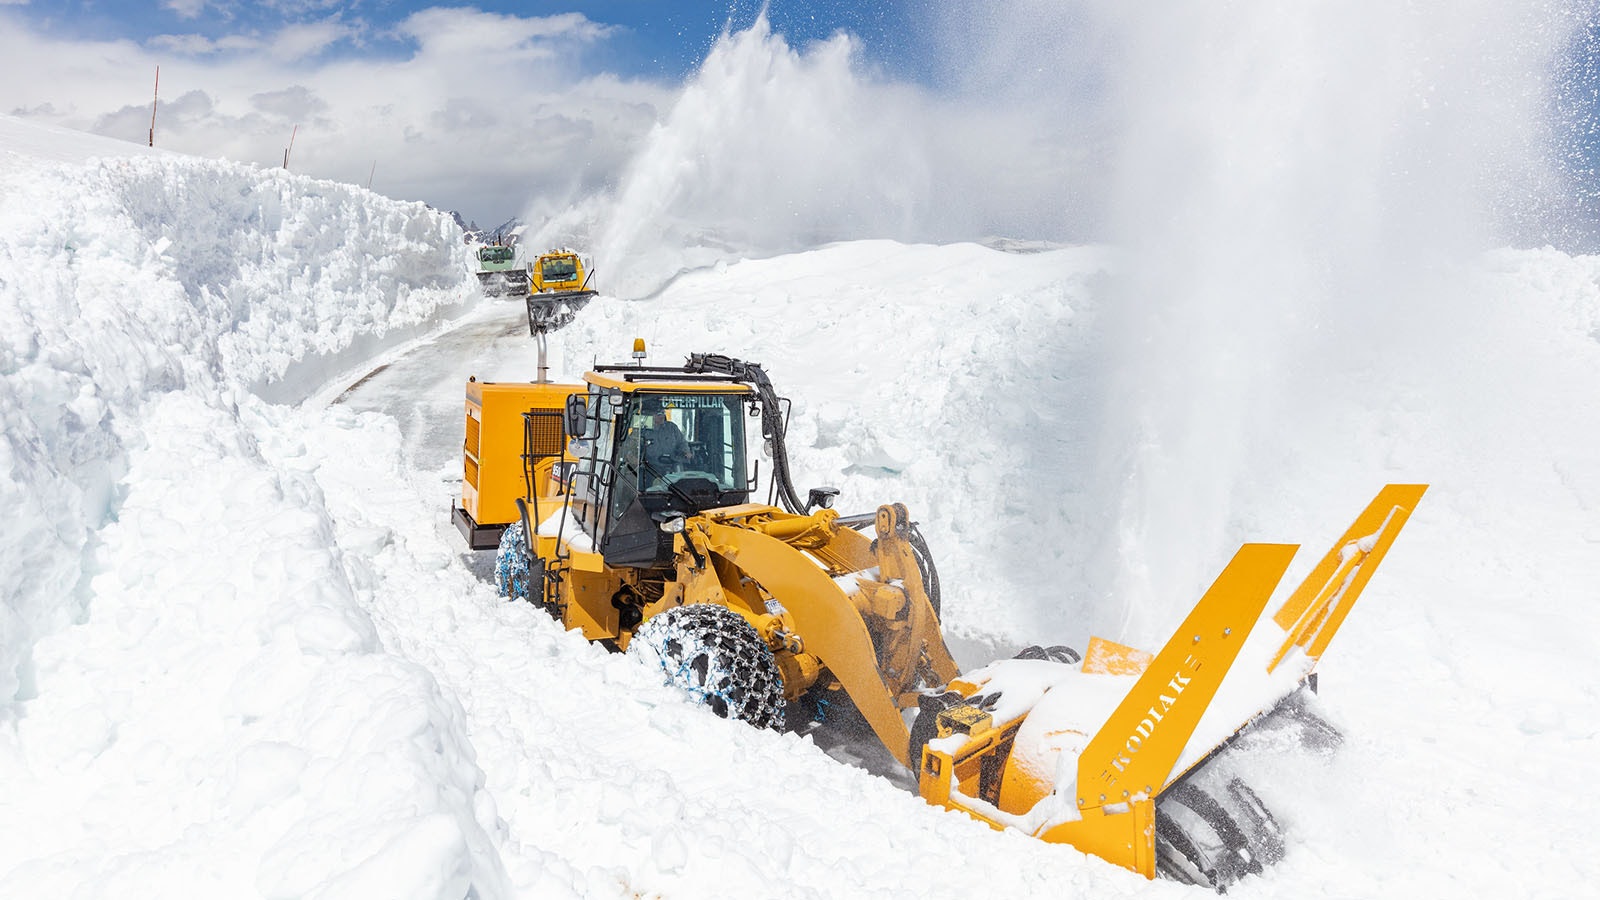 Crews in Yellowstone National Park work Thursday to clear parts of the Beartooth Highway, which still has up to 6 feet of wet, heavy snow on it.